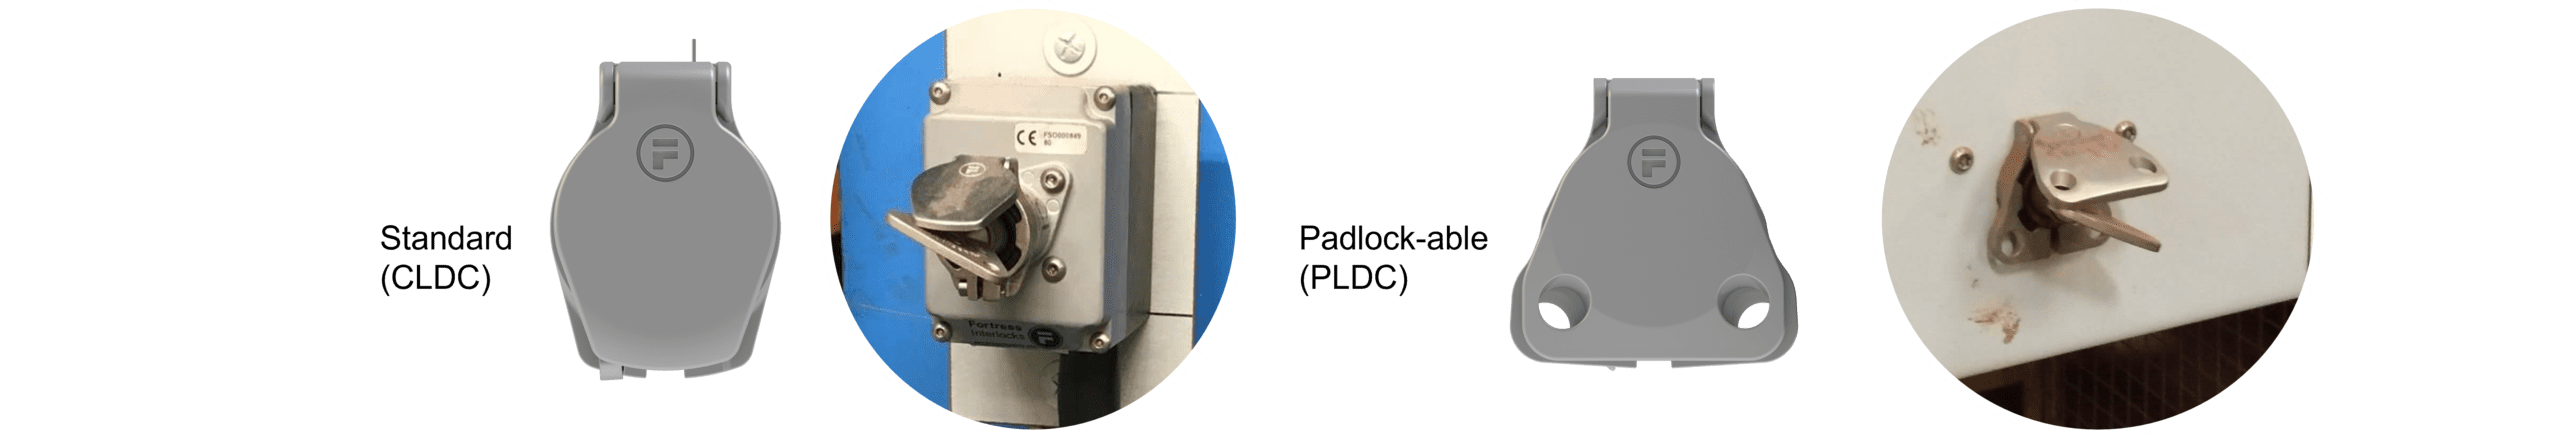 Lock Protection for Power Isolation